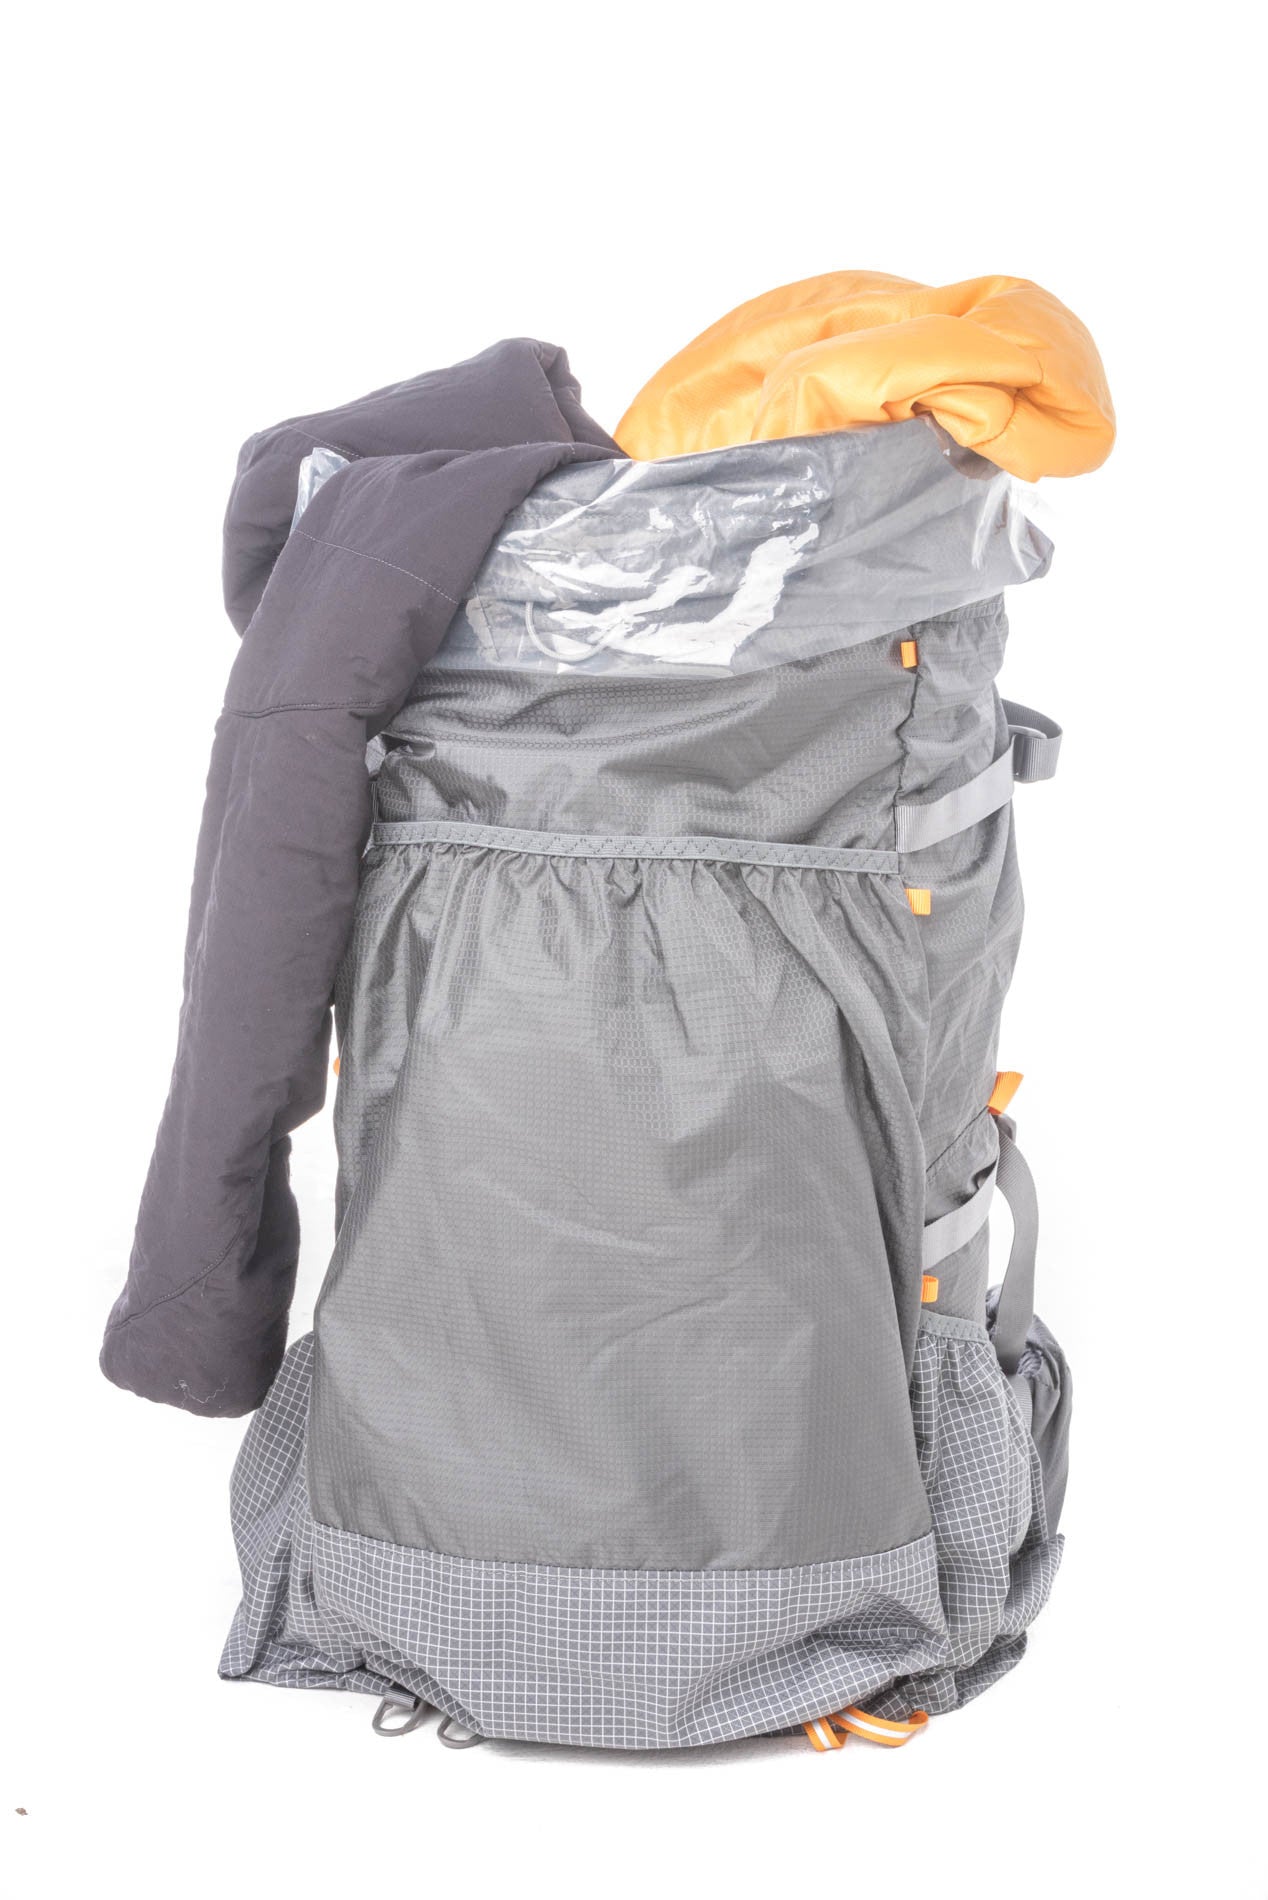 A liner is shown here waterproofing an ultralight backpack